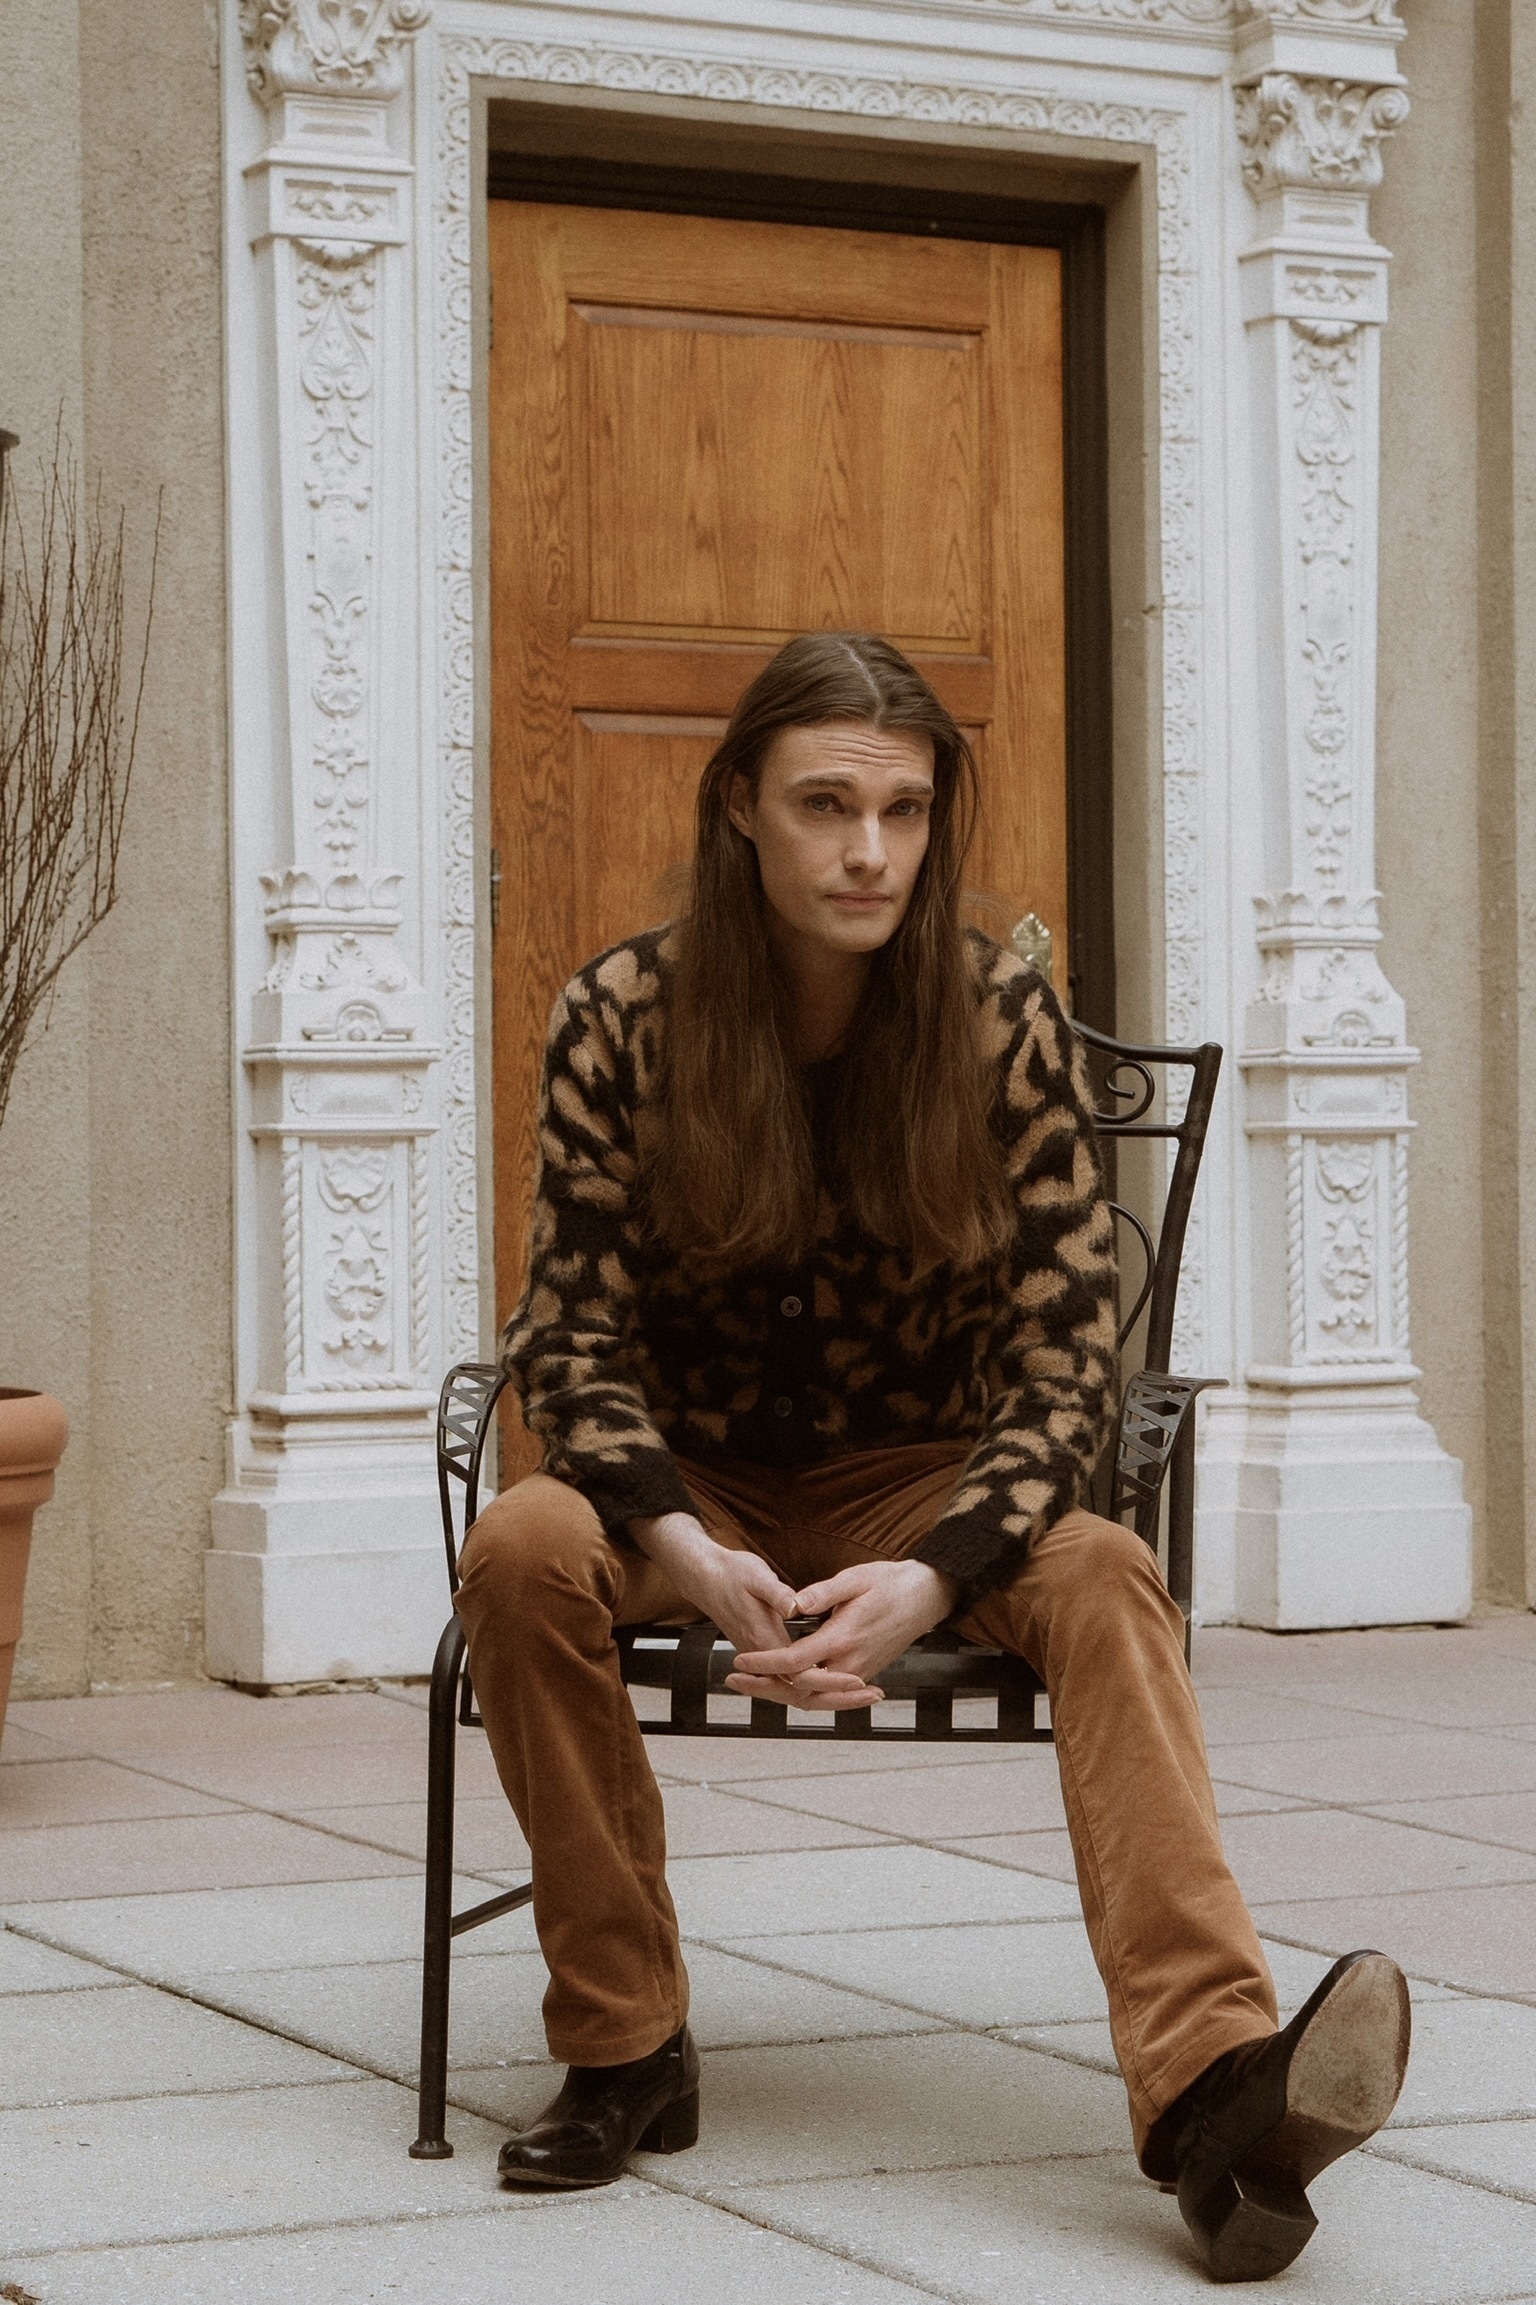 Hunter sits in a courtyard wearing brown velvet flare trousers, heeled black leather boots, and a leopard print sweater. His long brown hair is down.